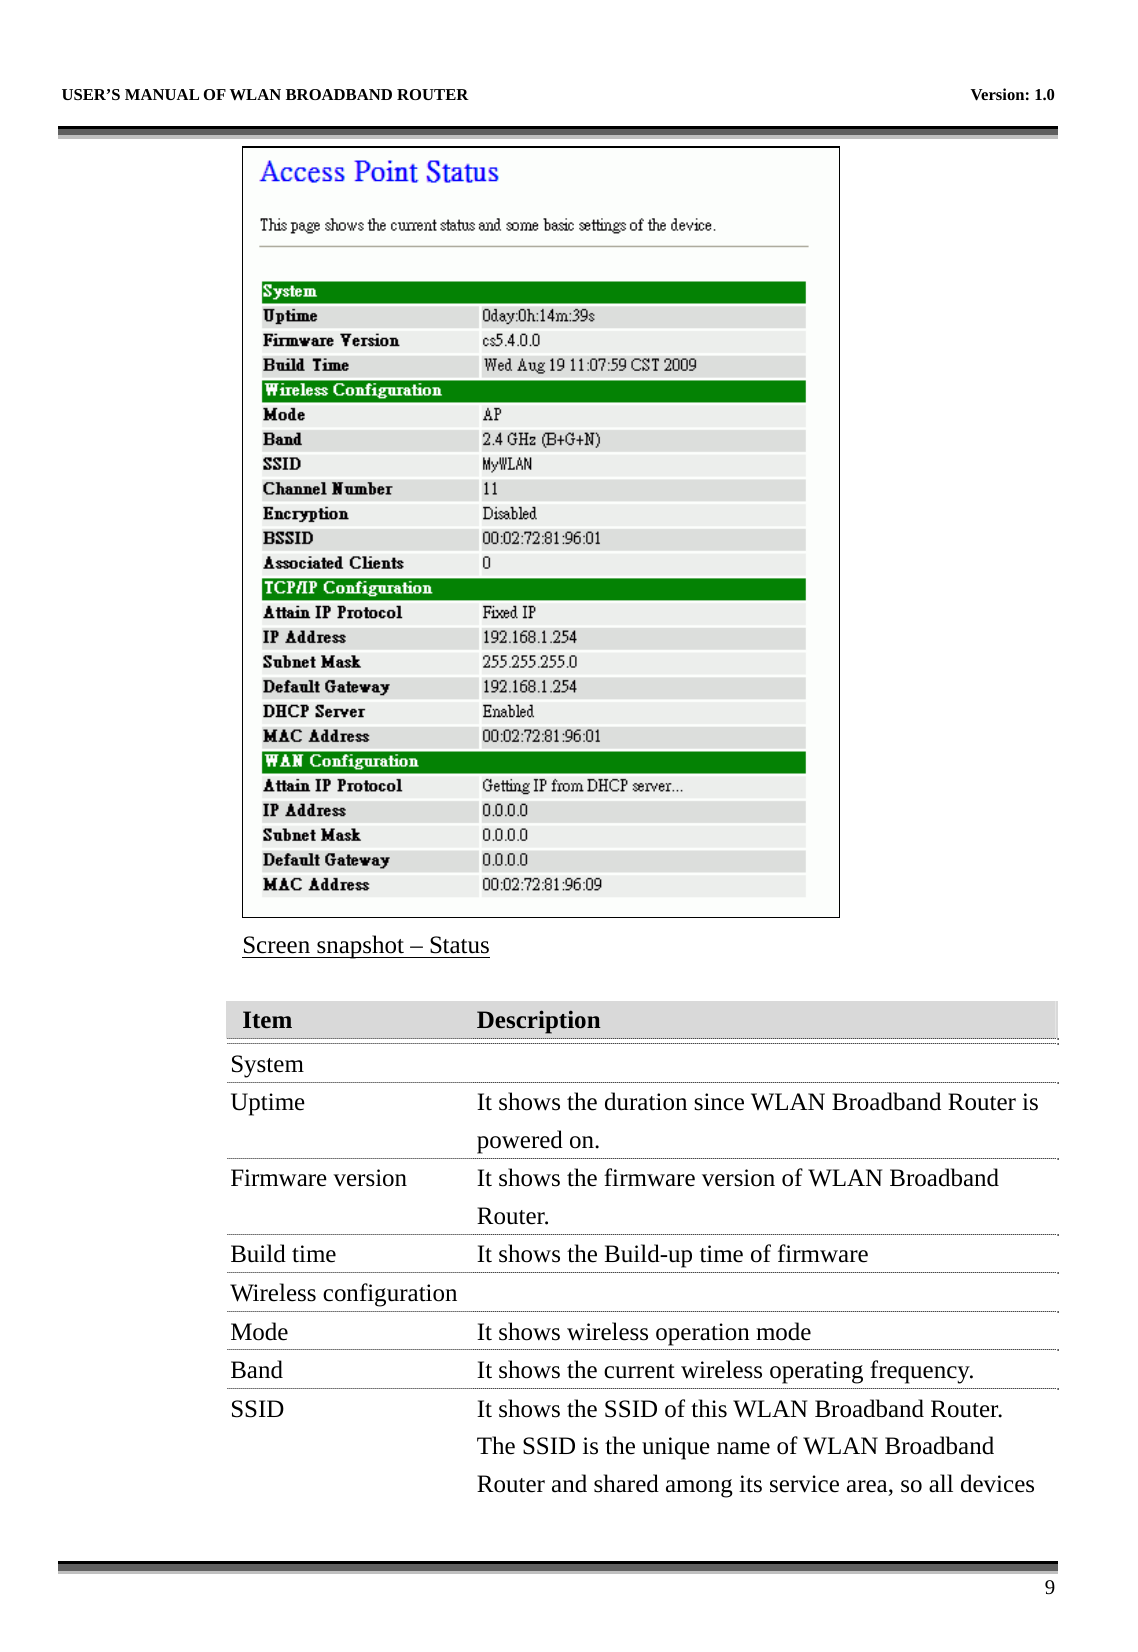   USER’S MANUAL OF WLAN BROADBAND ROUTER    Version: 1.0      9  Screen snapshot – Status  Item  Description   System  Uptime  It shows the duration since WLAN Broadband Router is powered on.   Firmware version  It shows the firmware version of WLAN Broadband Router. Build time  It shows the Build-up time of firmware Wireless configuration   Mode  It shows wireless operation mode Band  It shows the current wireless operating frequency. SSID  It shows the SSID of this WLAN Broadband Router. The SSID is the unique name of WLAN Broadband Router and shared among its service area, so all devices 